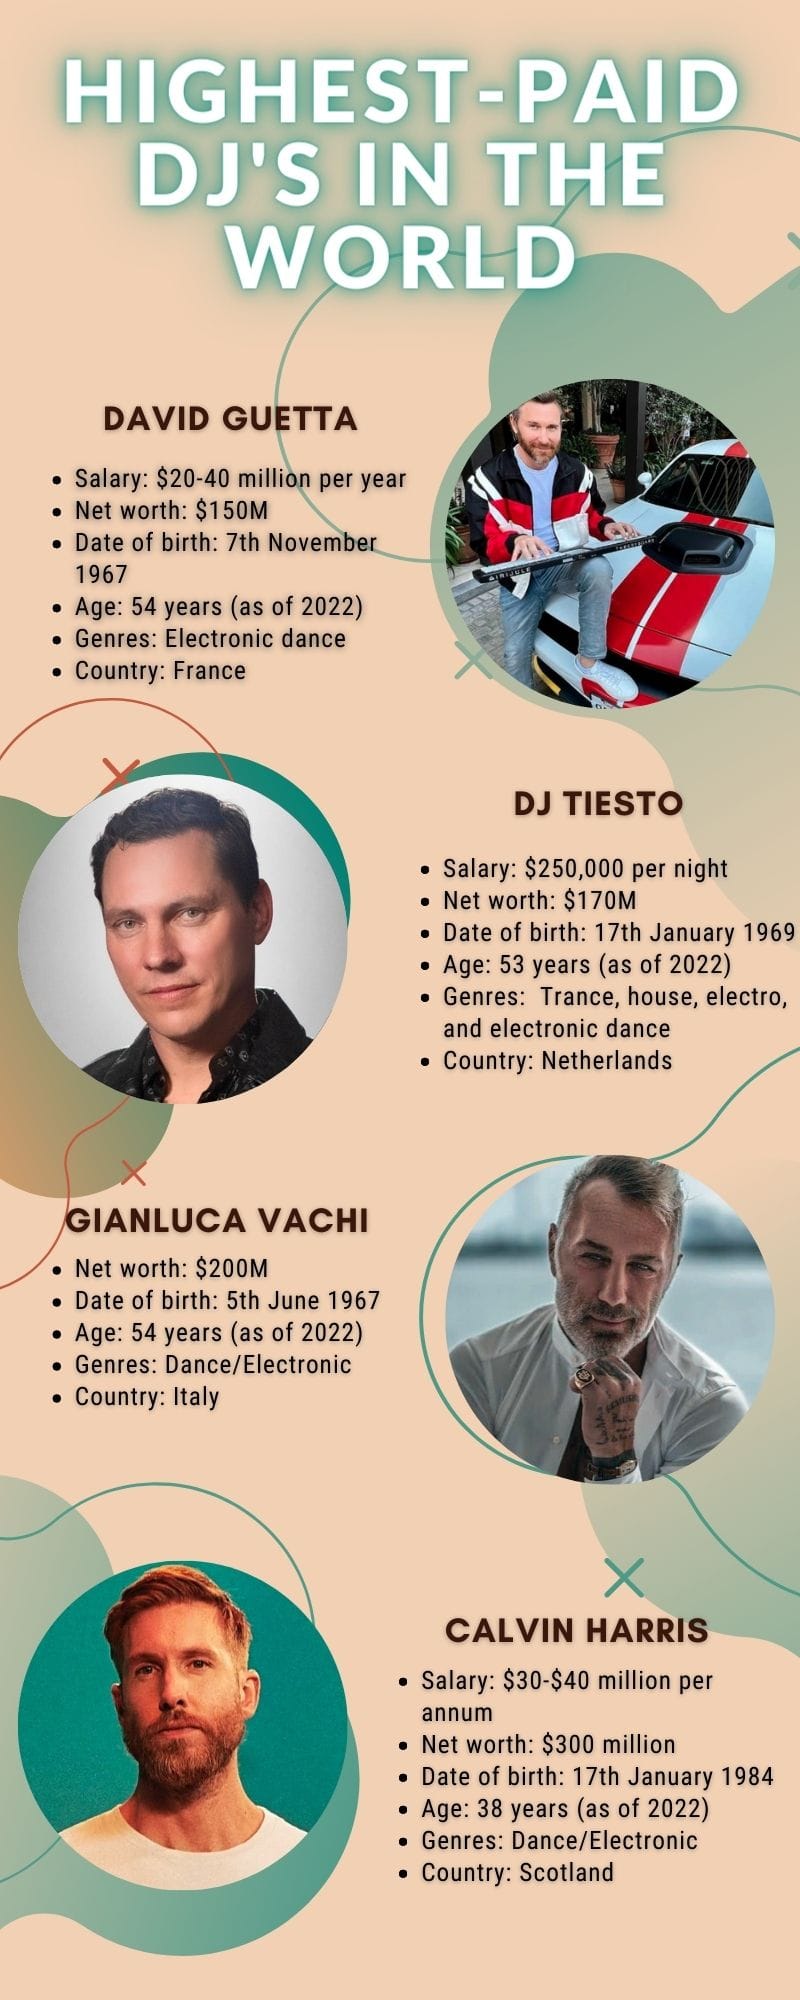 Highest-paid DJ in the world